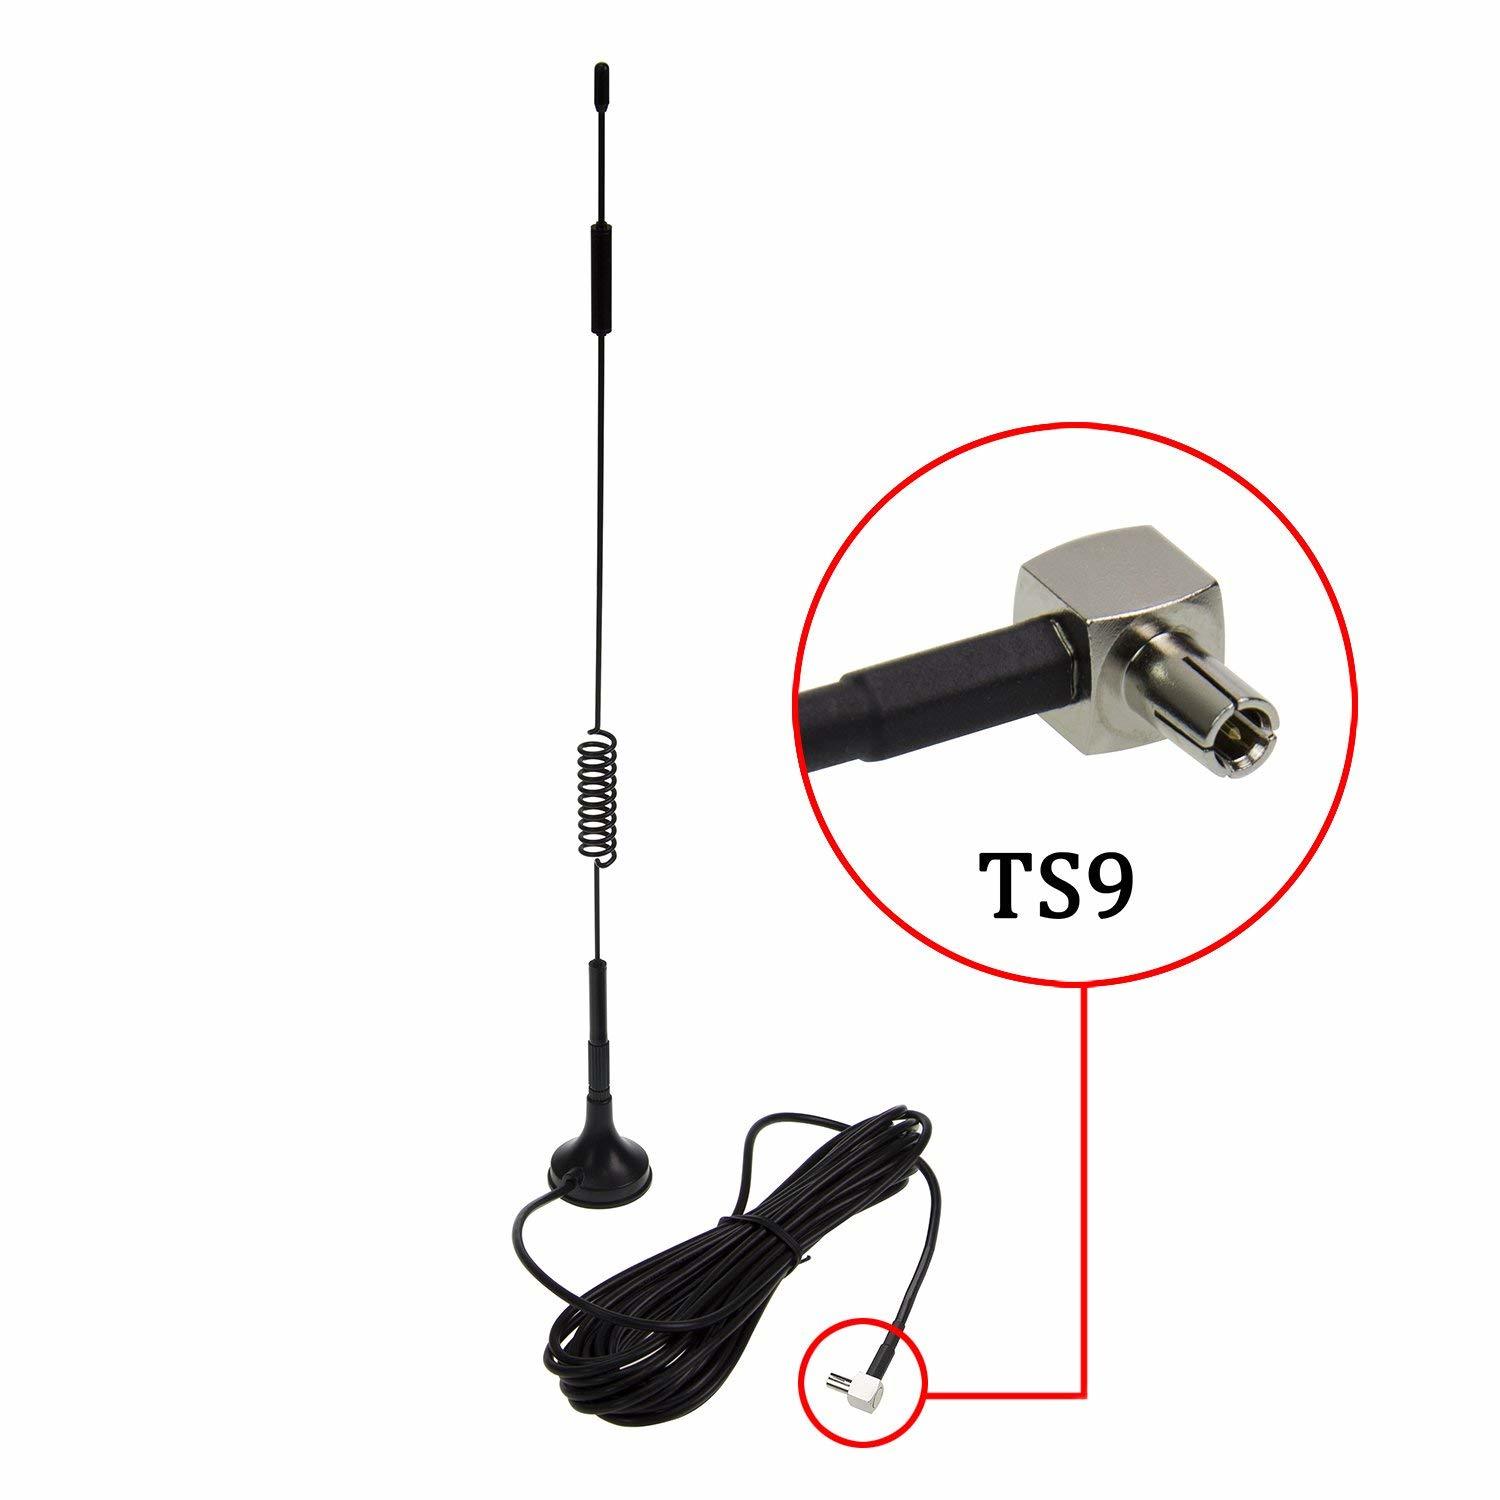 TS9 3dBi Magnetic Cellular Antenna Omni-Directional 4G 3G WiFi Mobile Hotspot Router